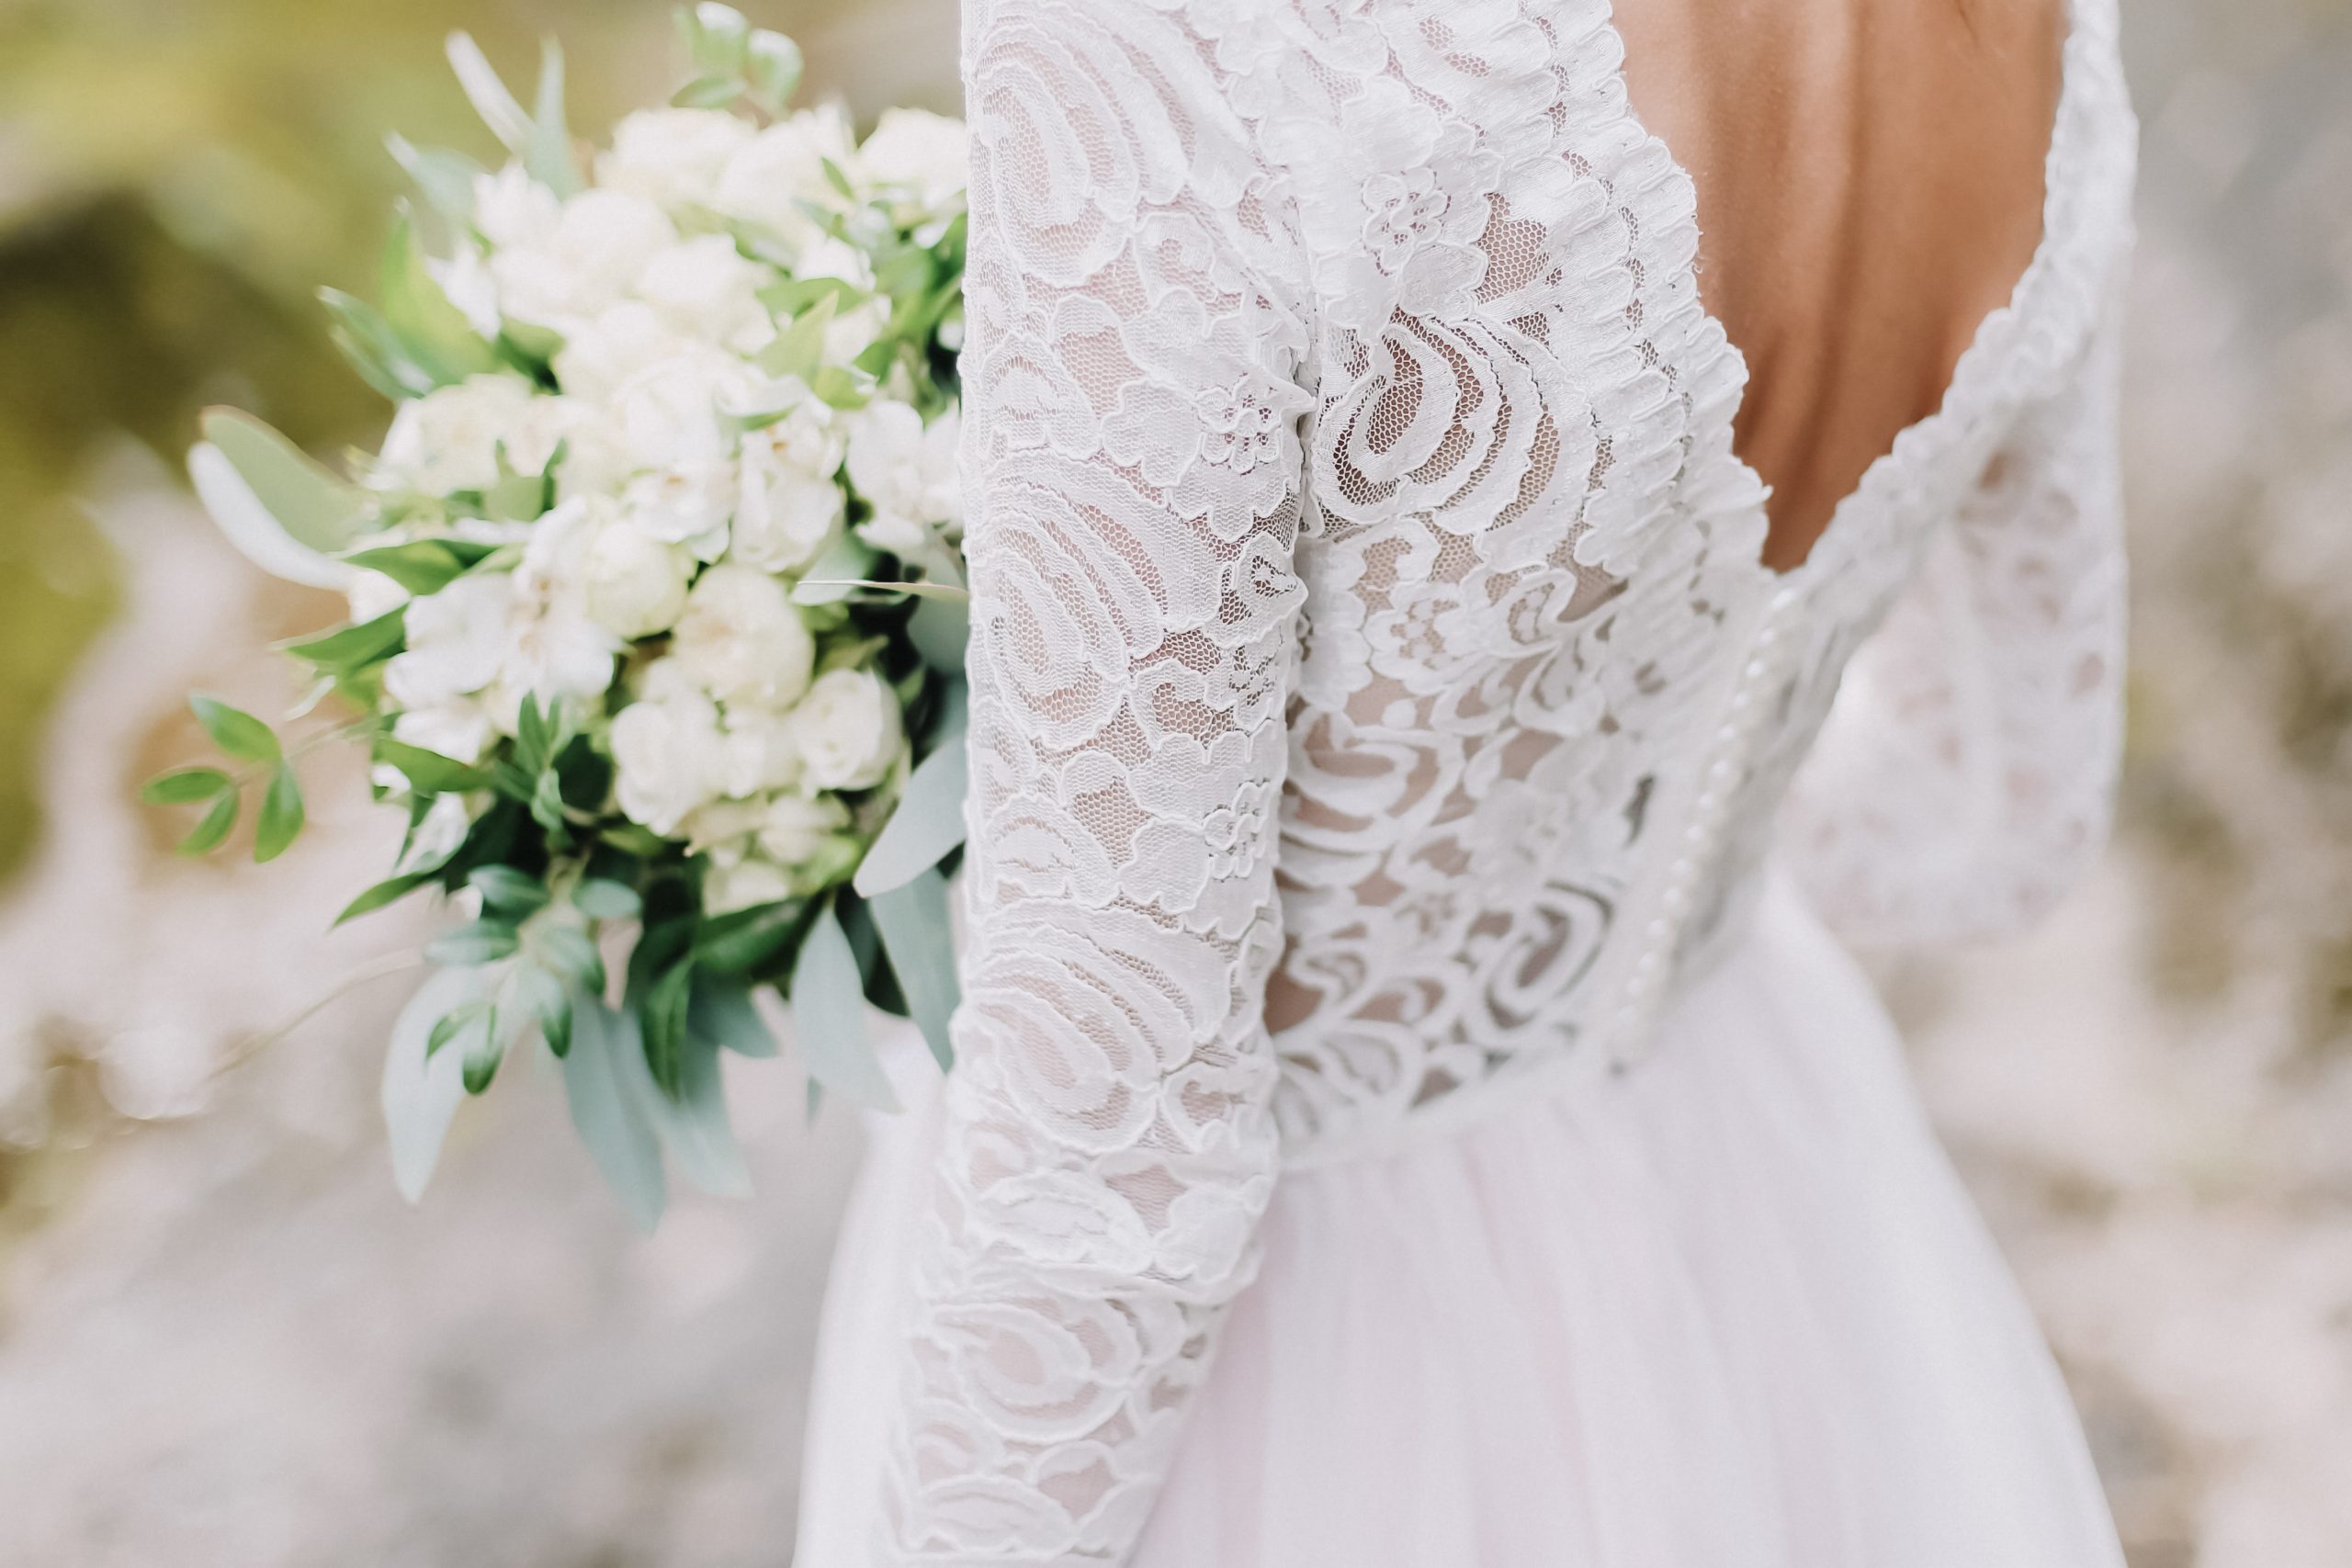 How To Find Your Dream Wedding Dress In ...